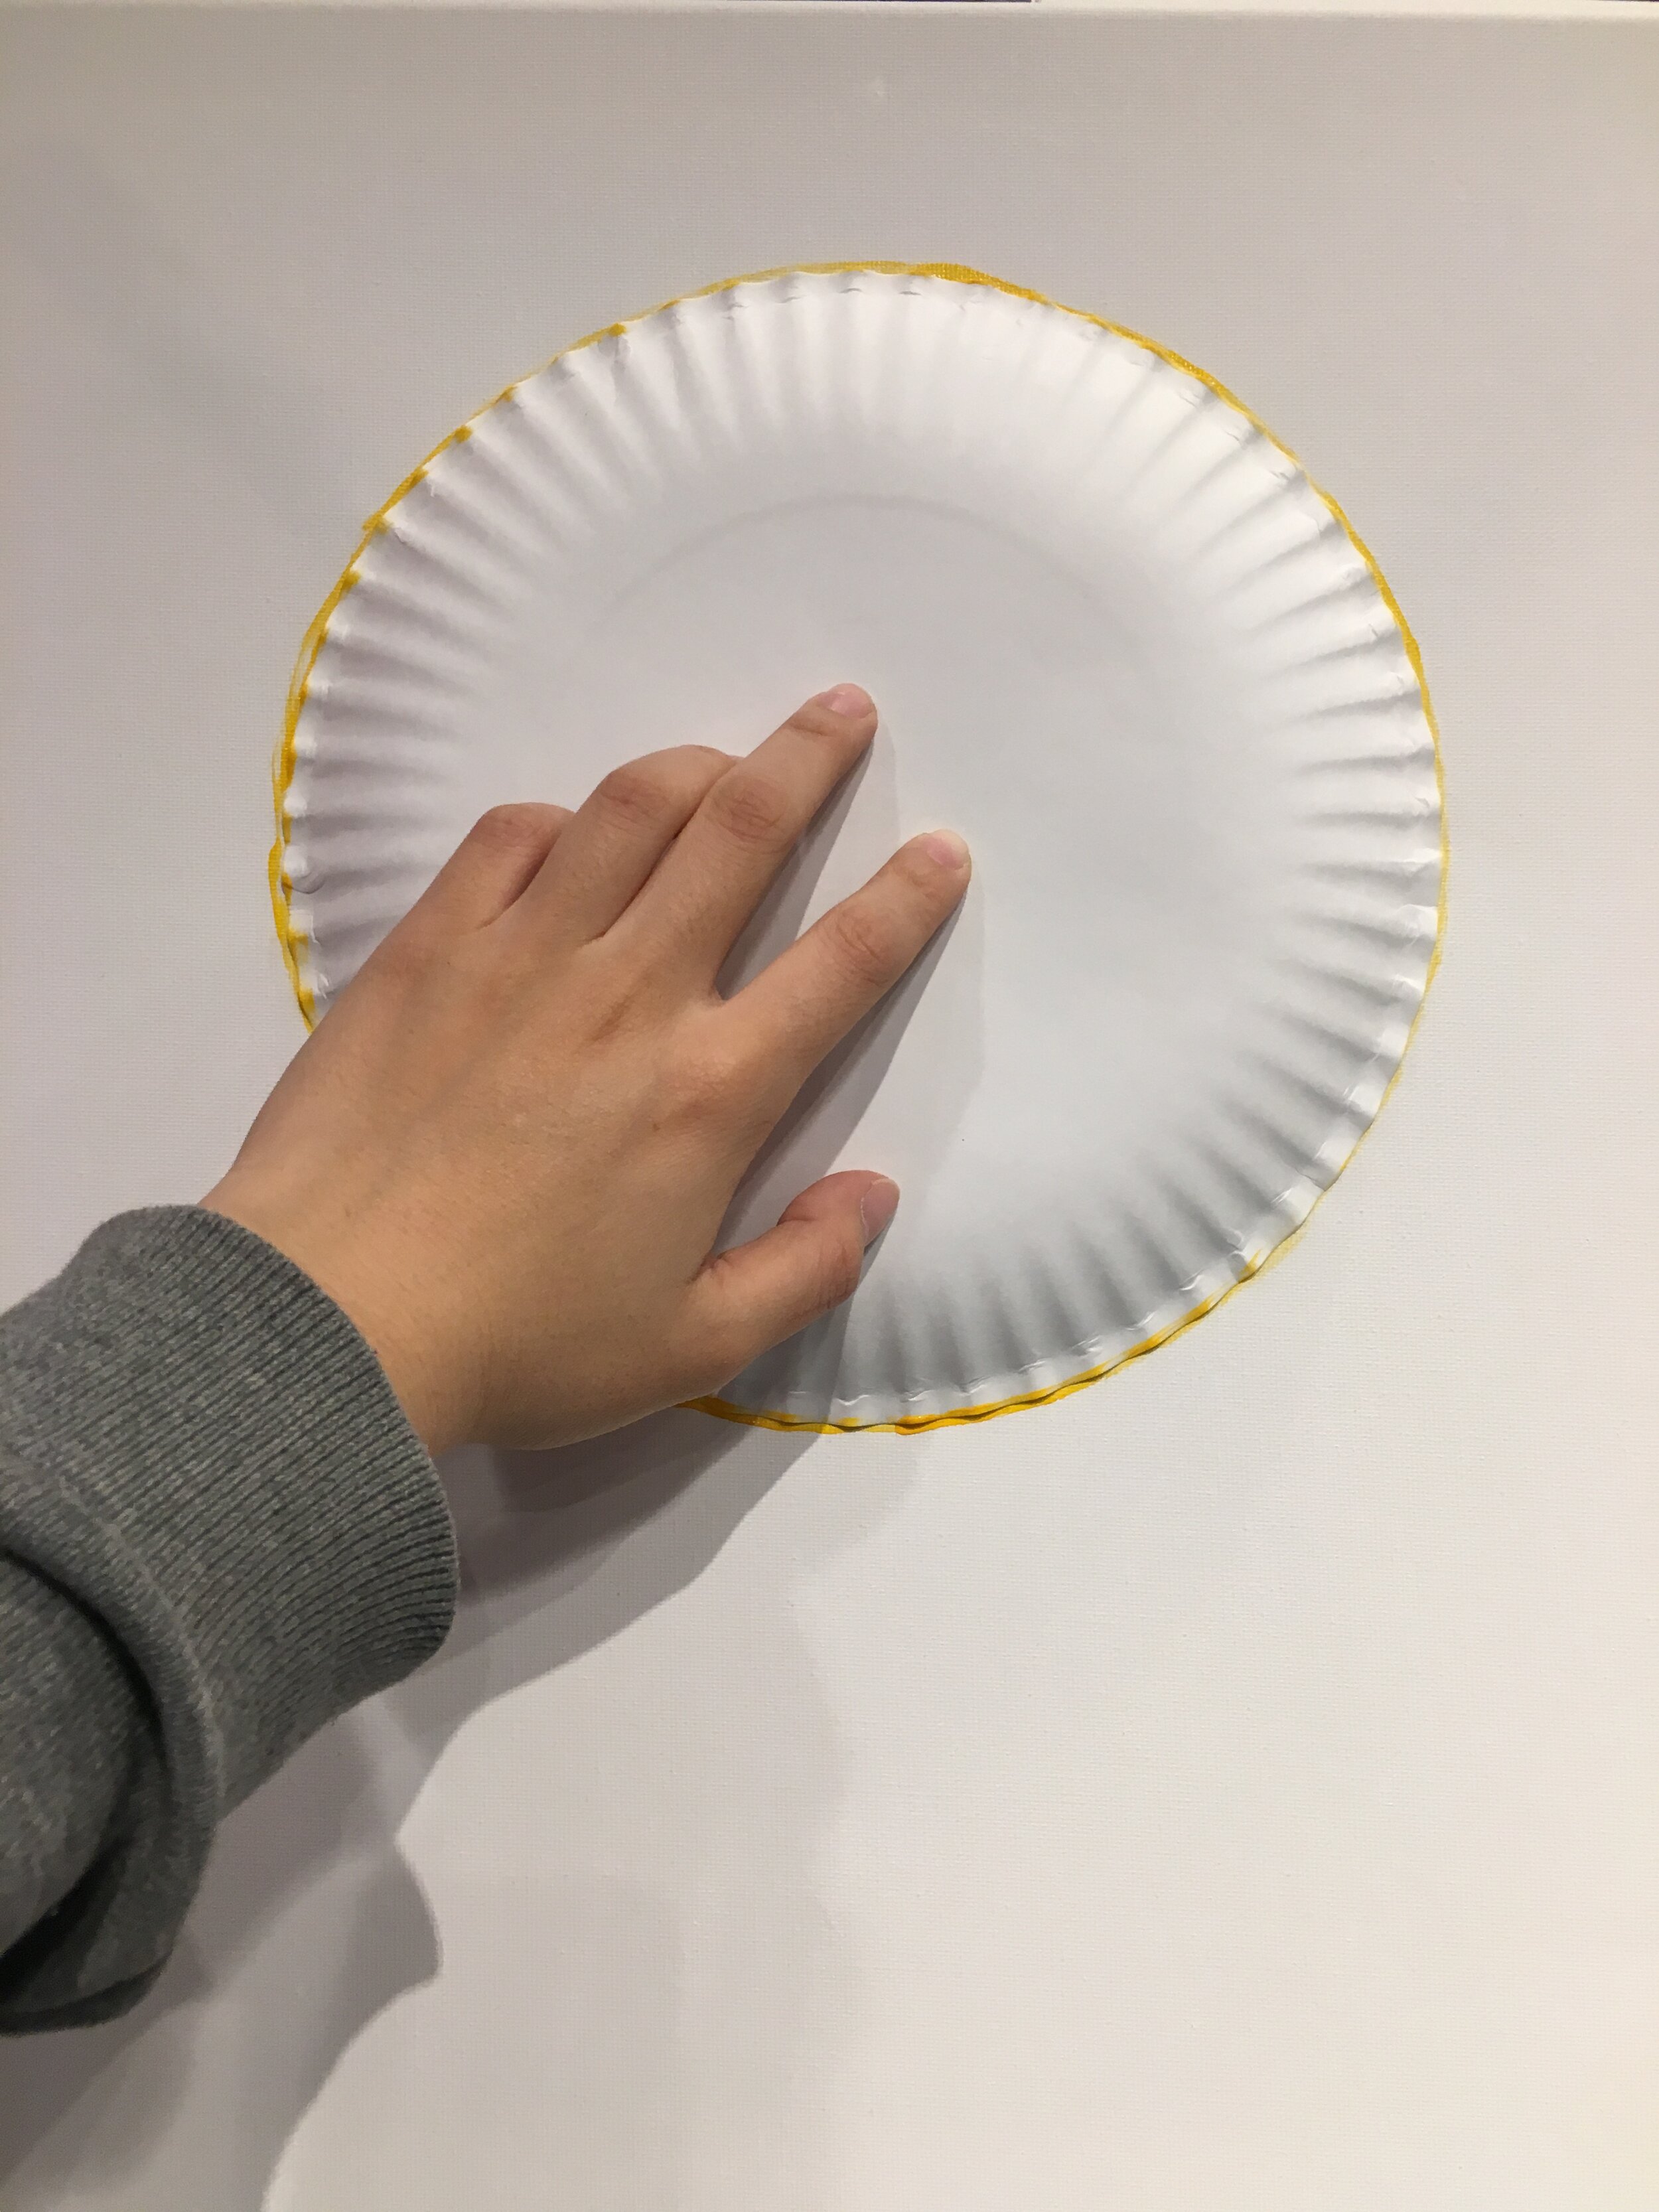 Using plate to make shapes